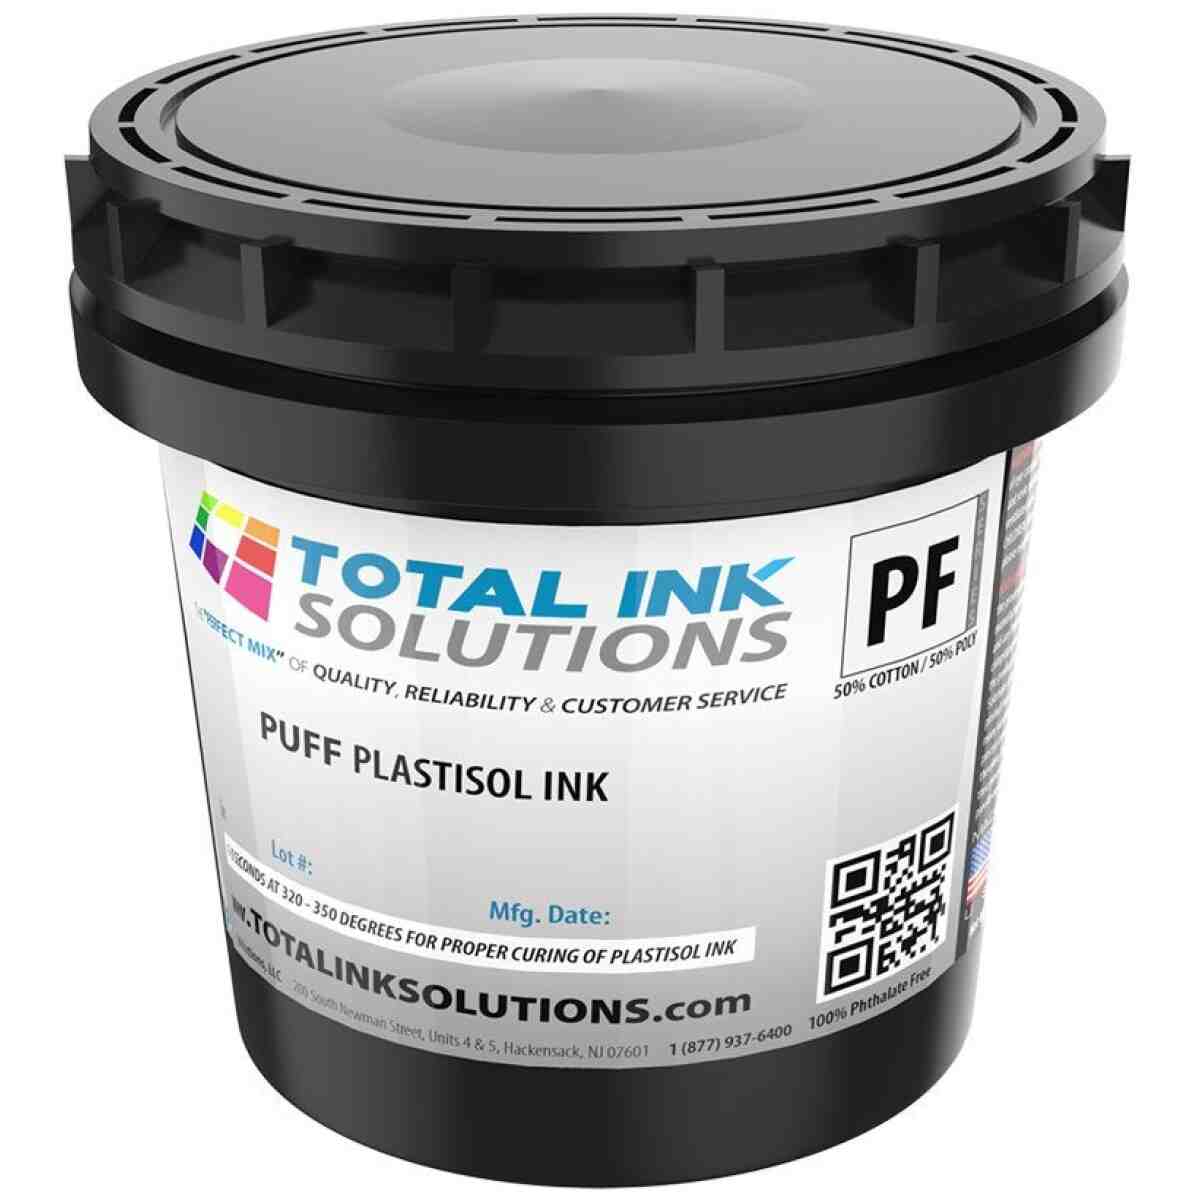 Puff Plastisol Ink - Pint TOTAL INK SOLUTIONS®